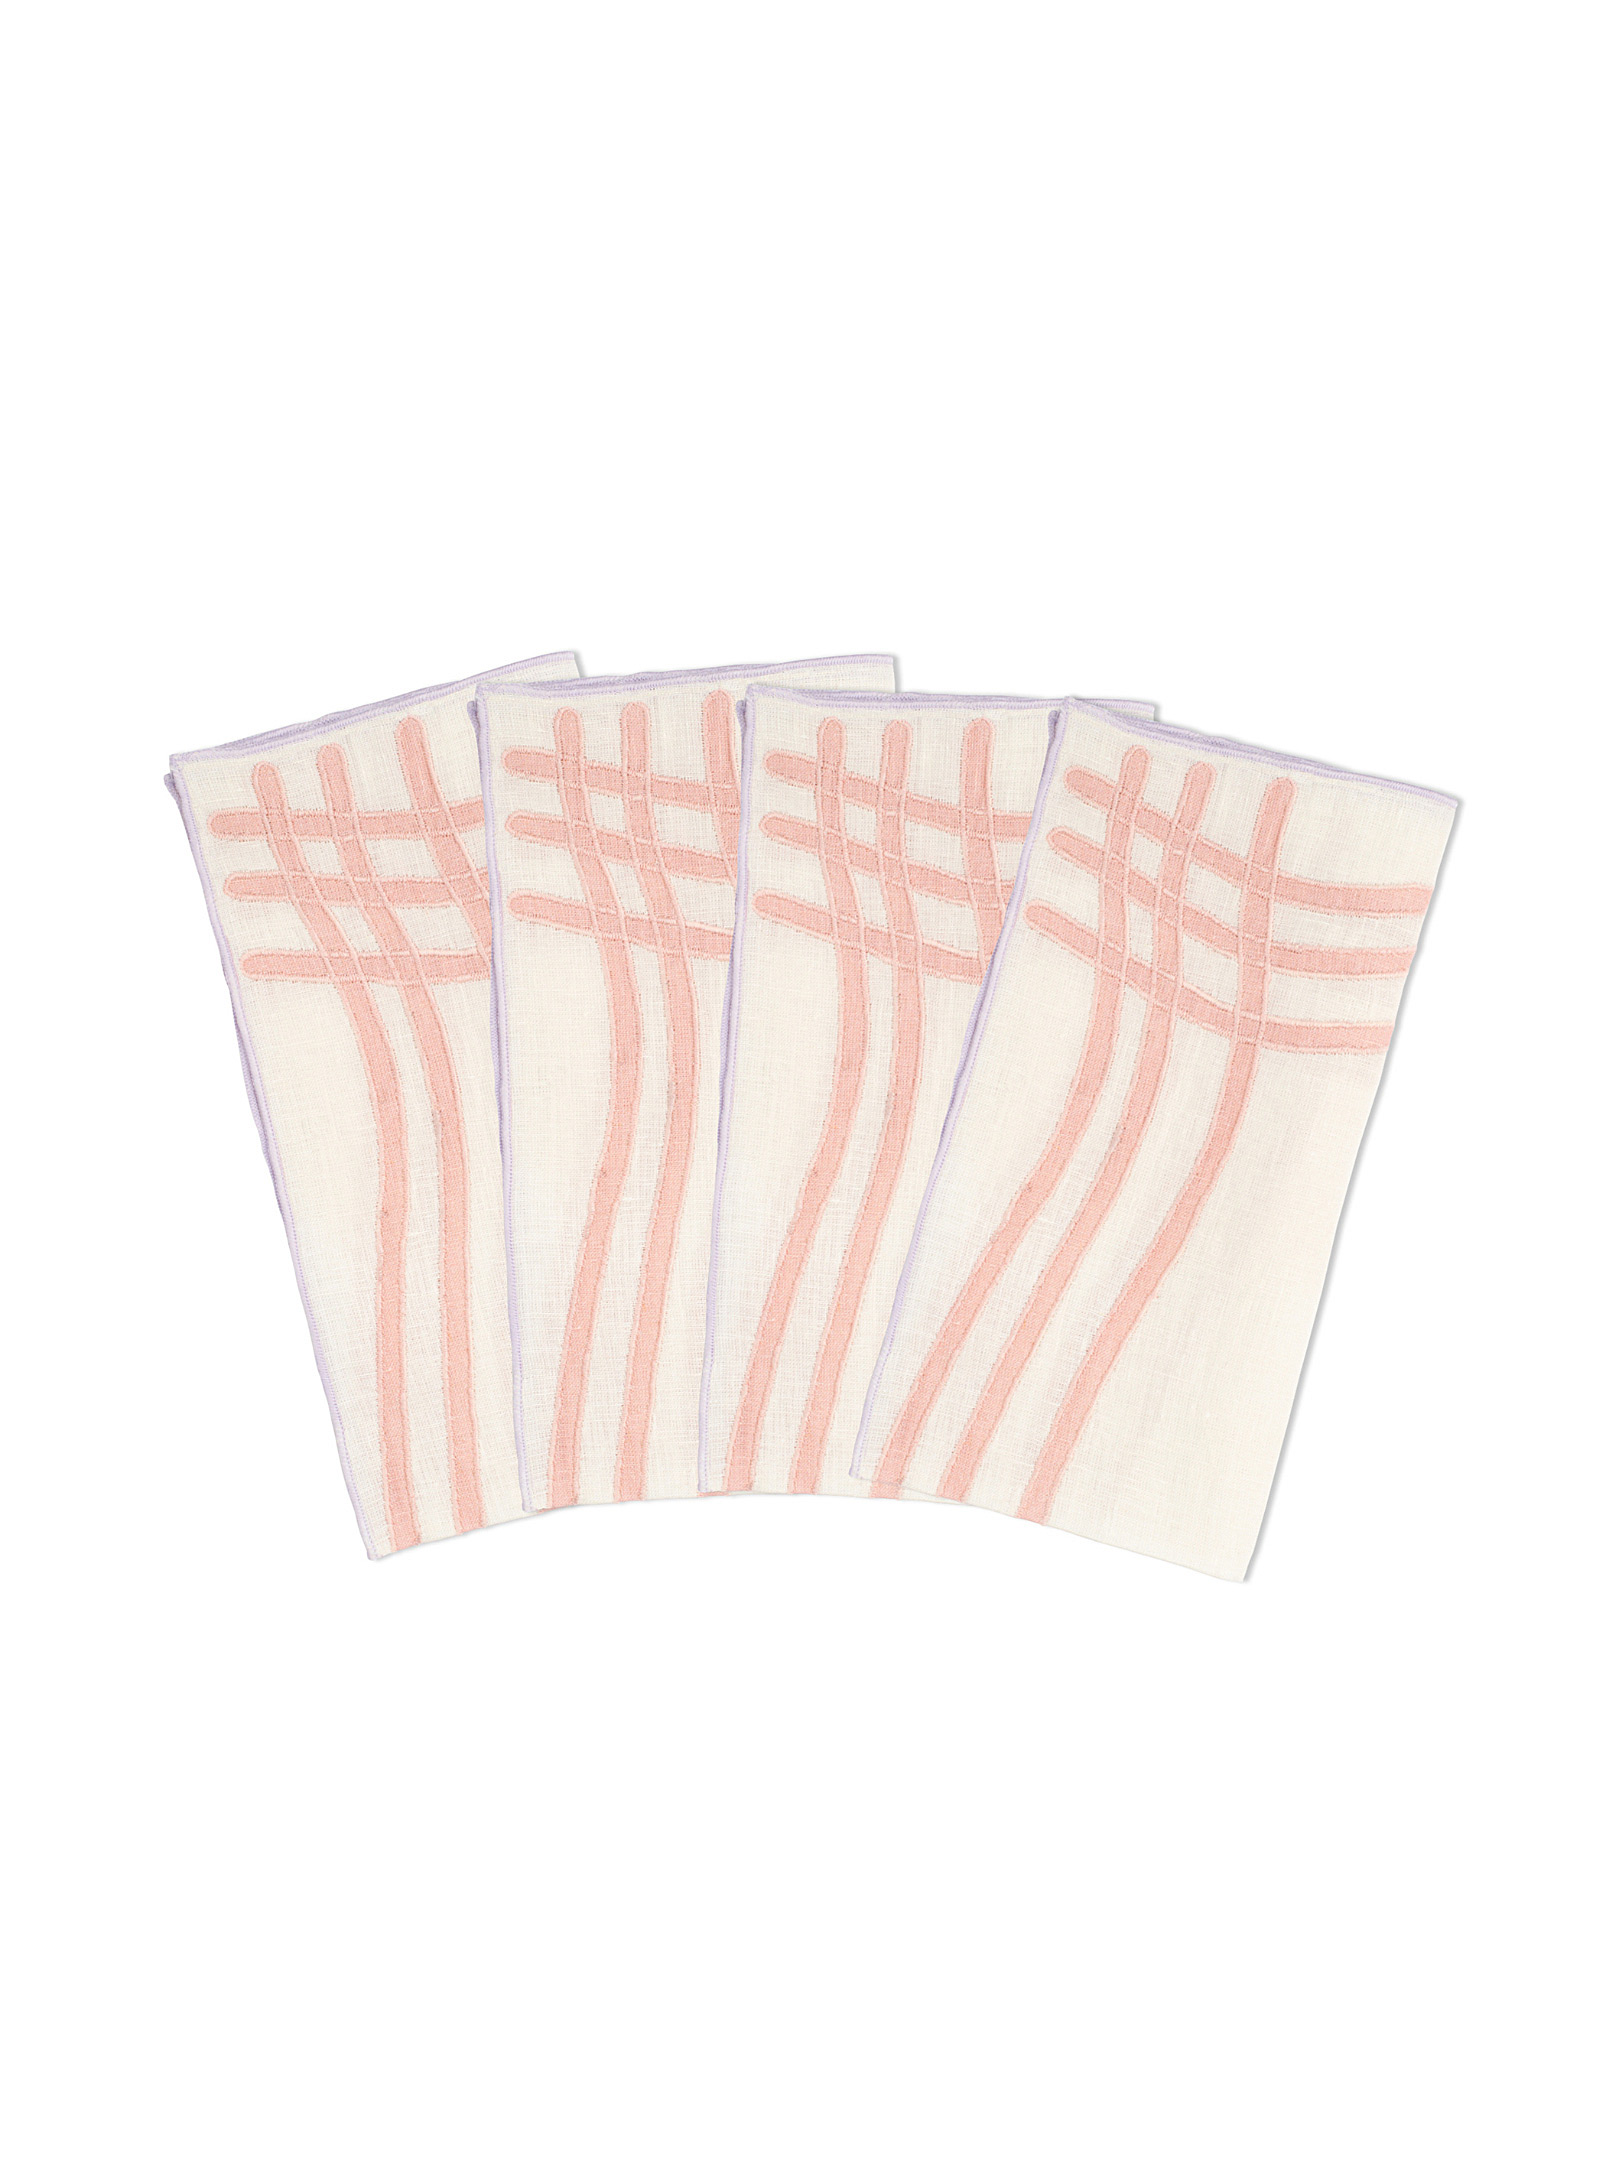 Misette Wavy Checkers Linen Napkins Set Of 4 In Pink